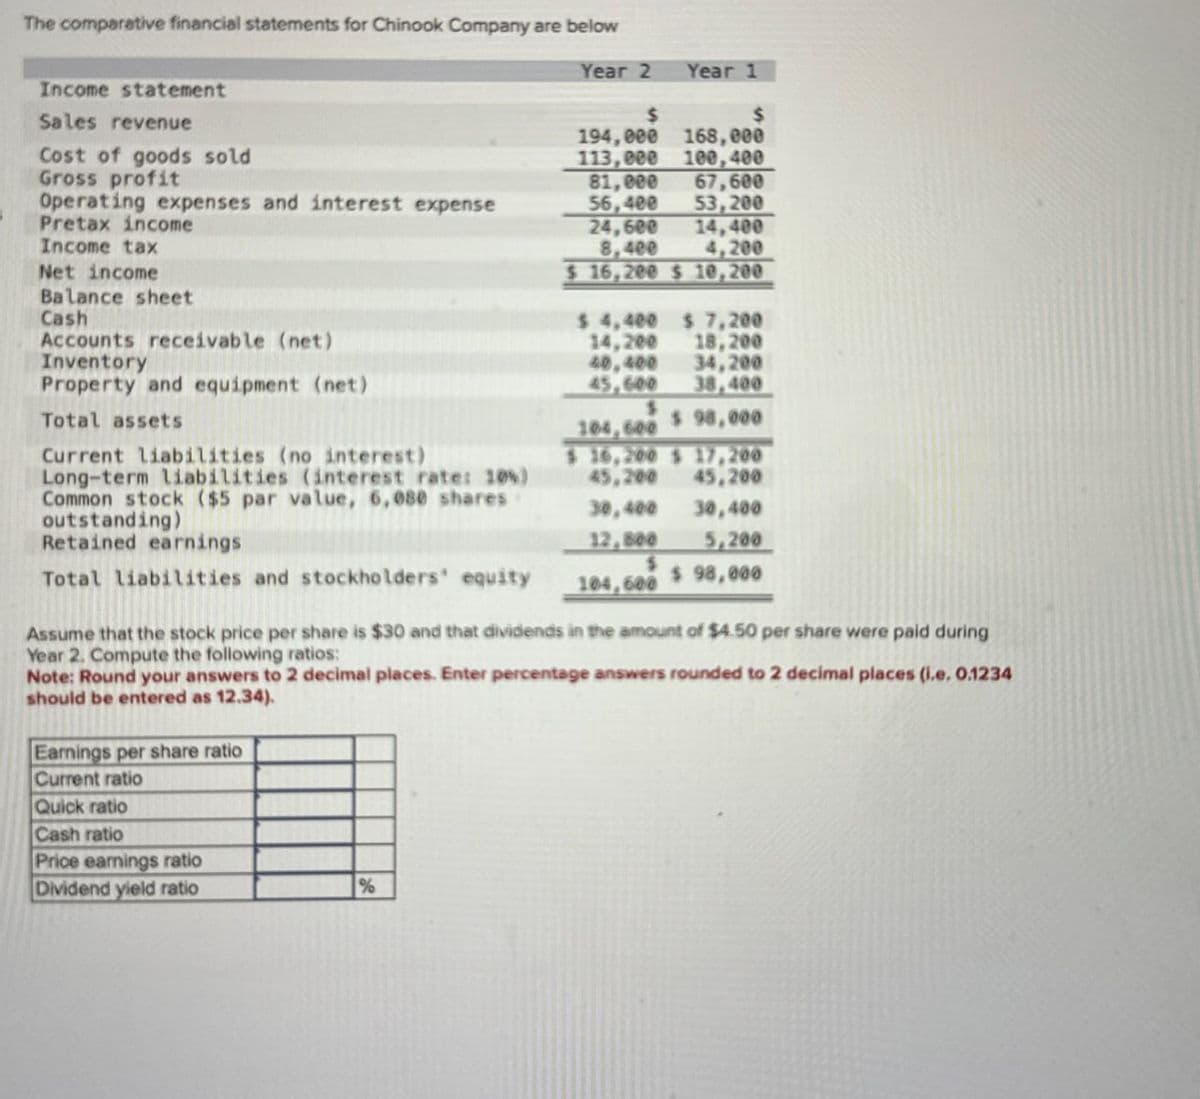 The comparative financial statements for Chinook Company are below
Income statement
Sales revenue
Cost of goods sold
Gross profit
Operating expenses and interest expense
Pretax income
Income tax
Net income
Balance sheet
Cash
Year 2
Year 1
$
194,000
$
168,000
113,000 100,400
81,000 67,600
56,400
53,200
24,600
14,400
8,400
4,200
$ 16,200 $ 10,200
$ 4,400
$7,200
14,200
18,200
Accounts receivable (net)
Inventory
Property and equipment (net)
Total assets
Current liabilities (no interest)
Long-term liabilities (interest rate: 10%)
Common stock ($5 par value, 6,080 shares
outstanding)
Retained earnings
Total liabilities and stockholders' equity
40,400 34,200
45,600 38,400
$
104,600
$ 98,000
$16,200 $ 17,200
45,200 45,200
30,400
30,400
12,800
5,200
$
$ 98,000
104,600
Assume that the stock price per share is $30 and that dividends in the amount of $4.50 per share were paid during
Year 2. Compute the following ratios:
Note: Round your answers to 2 decimal places. Enter percentage answers rounded to 2 decimal places (i.e. 0.1234
should be entered as 12.34).
Earnings per share ratio
Current ratio
Quick ratio
Cash ratio
Price earnings ratio
Dividend yield ratio
%